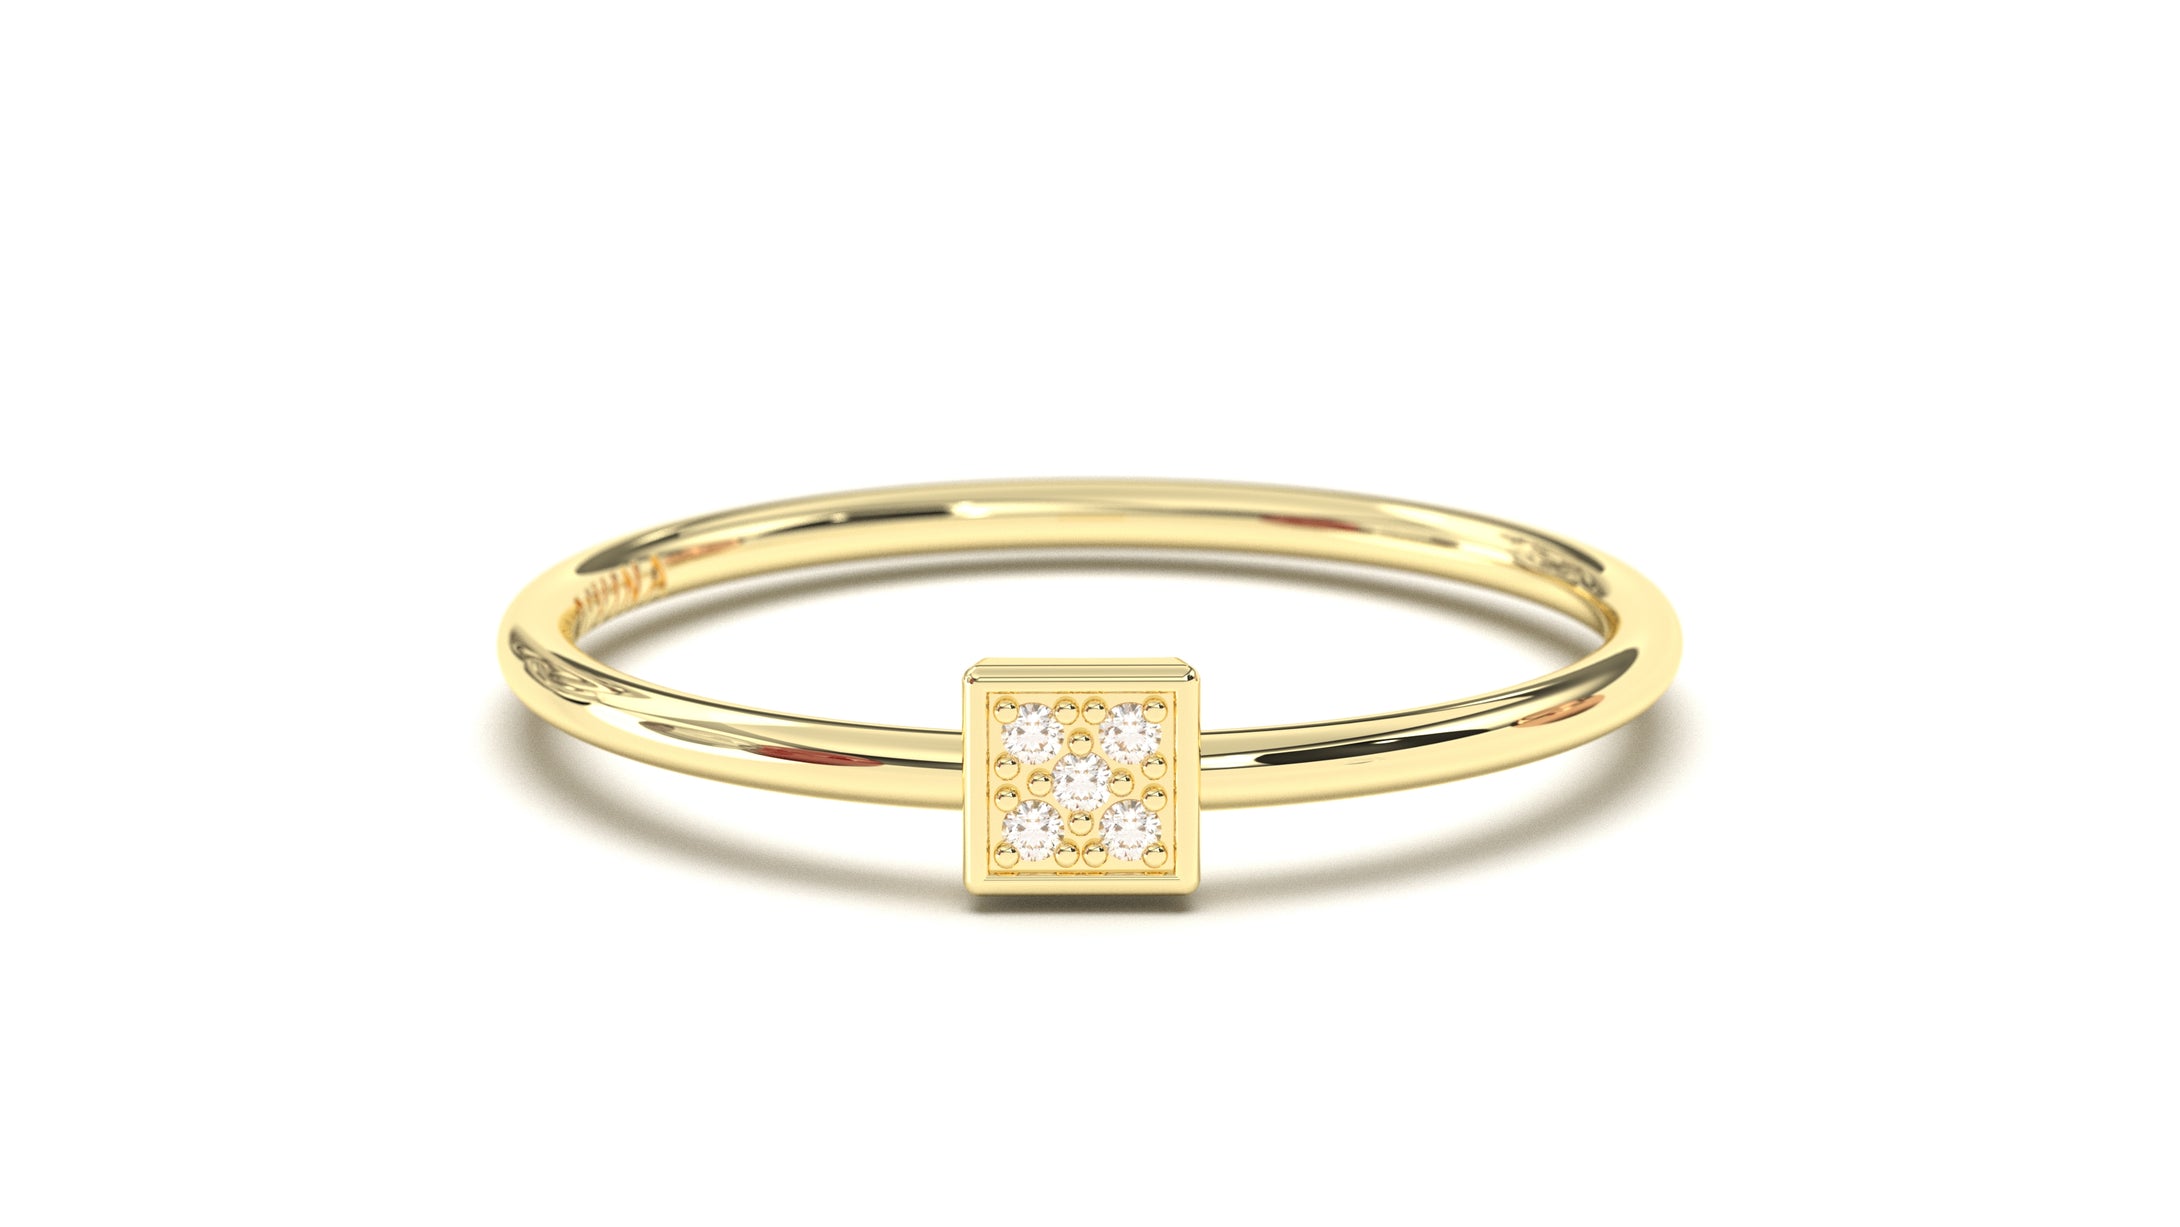 Ring with Square Box Encrusted with Round White Diamonds | Mix & Match Trio XVIII